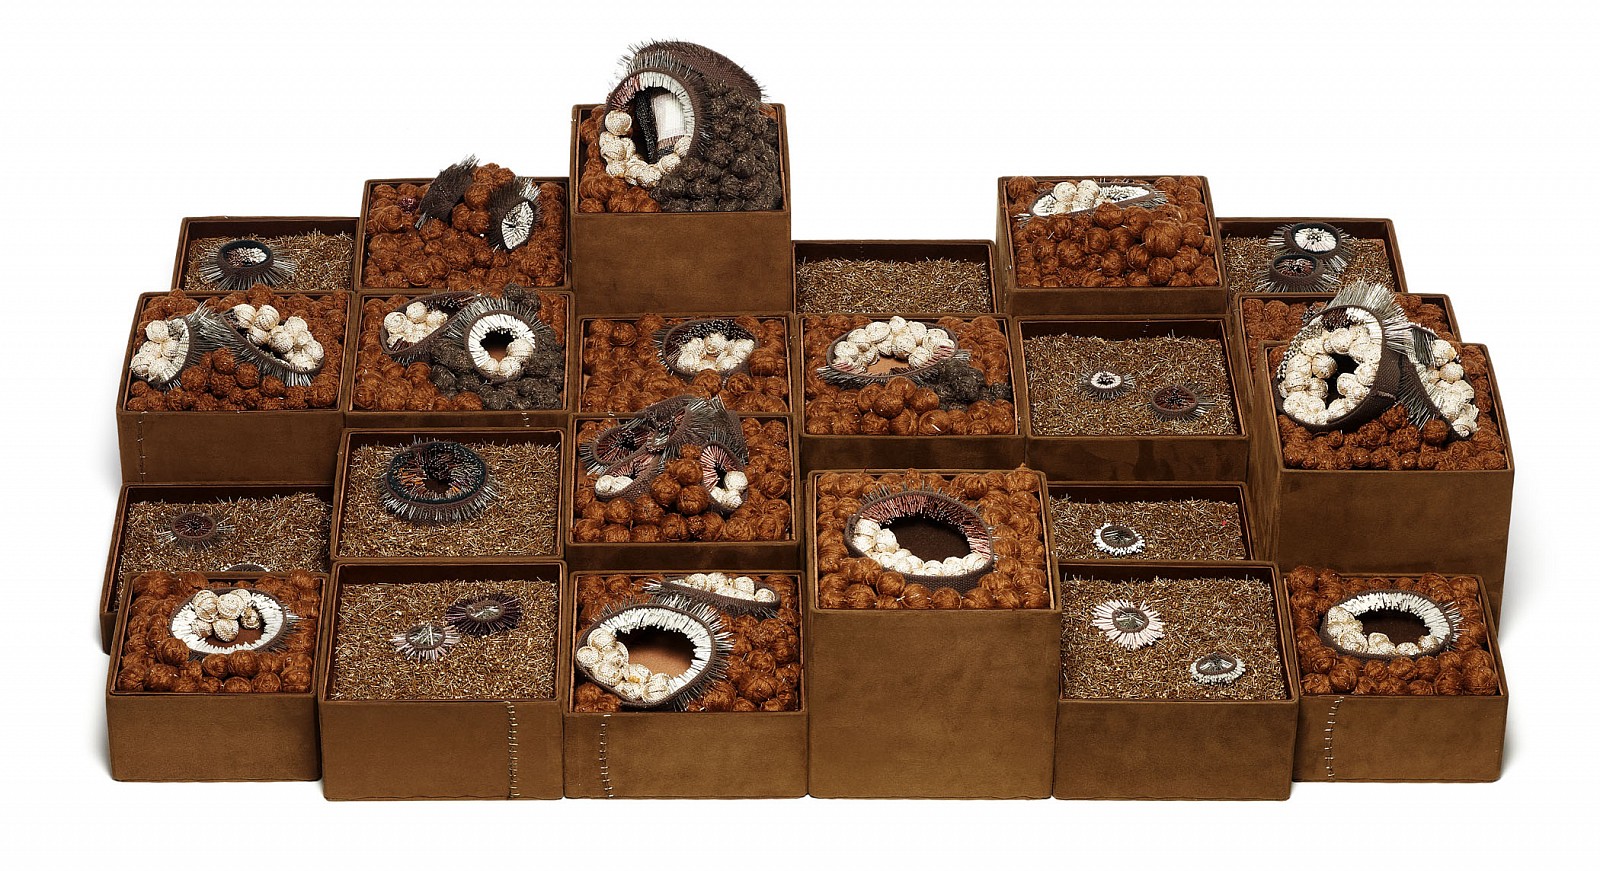 Steven and William Ladd
Dad, 2010
archival board, fiber, beads, metal, 46 x 30 19/50 x 11 1/2 in.